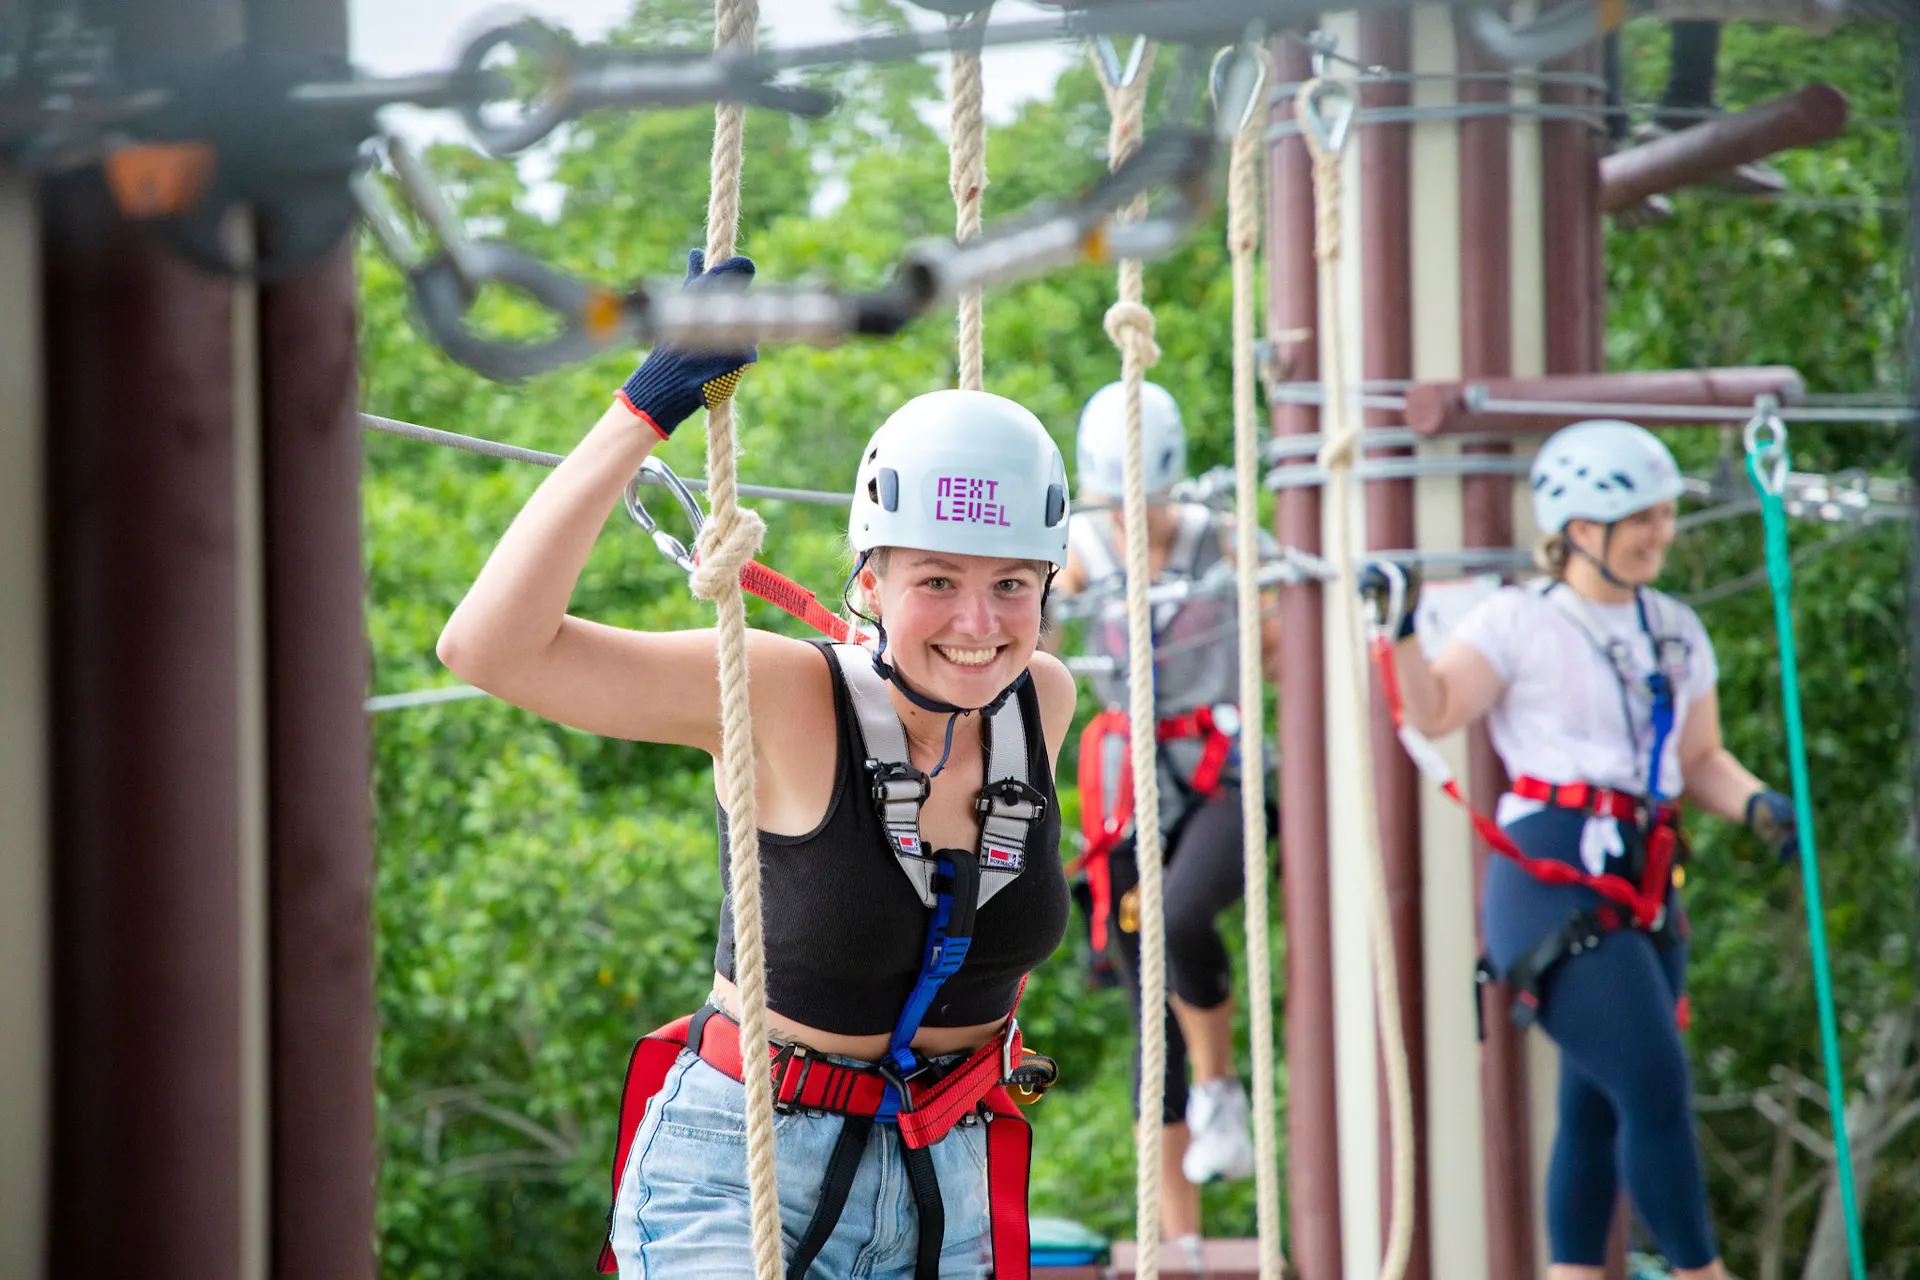 Climb up on courses ranging from 5-18m above the ground